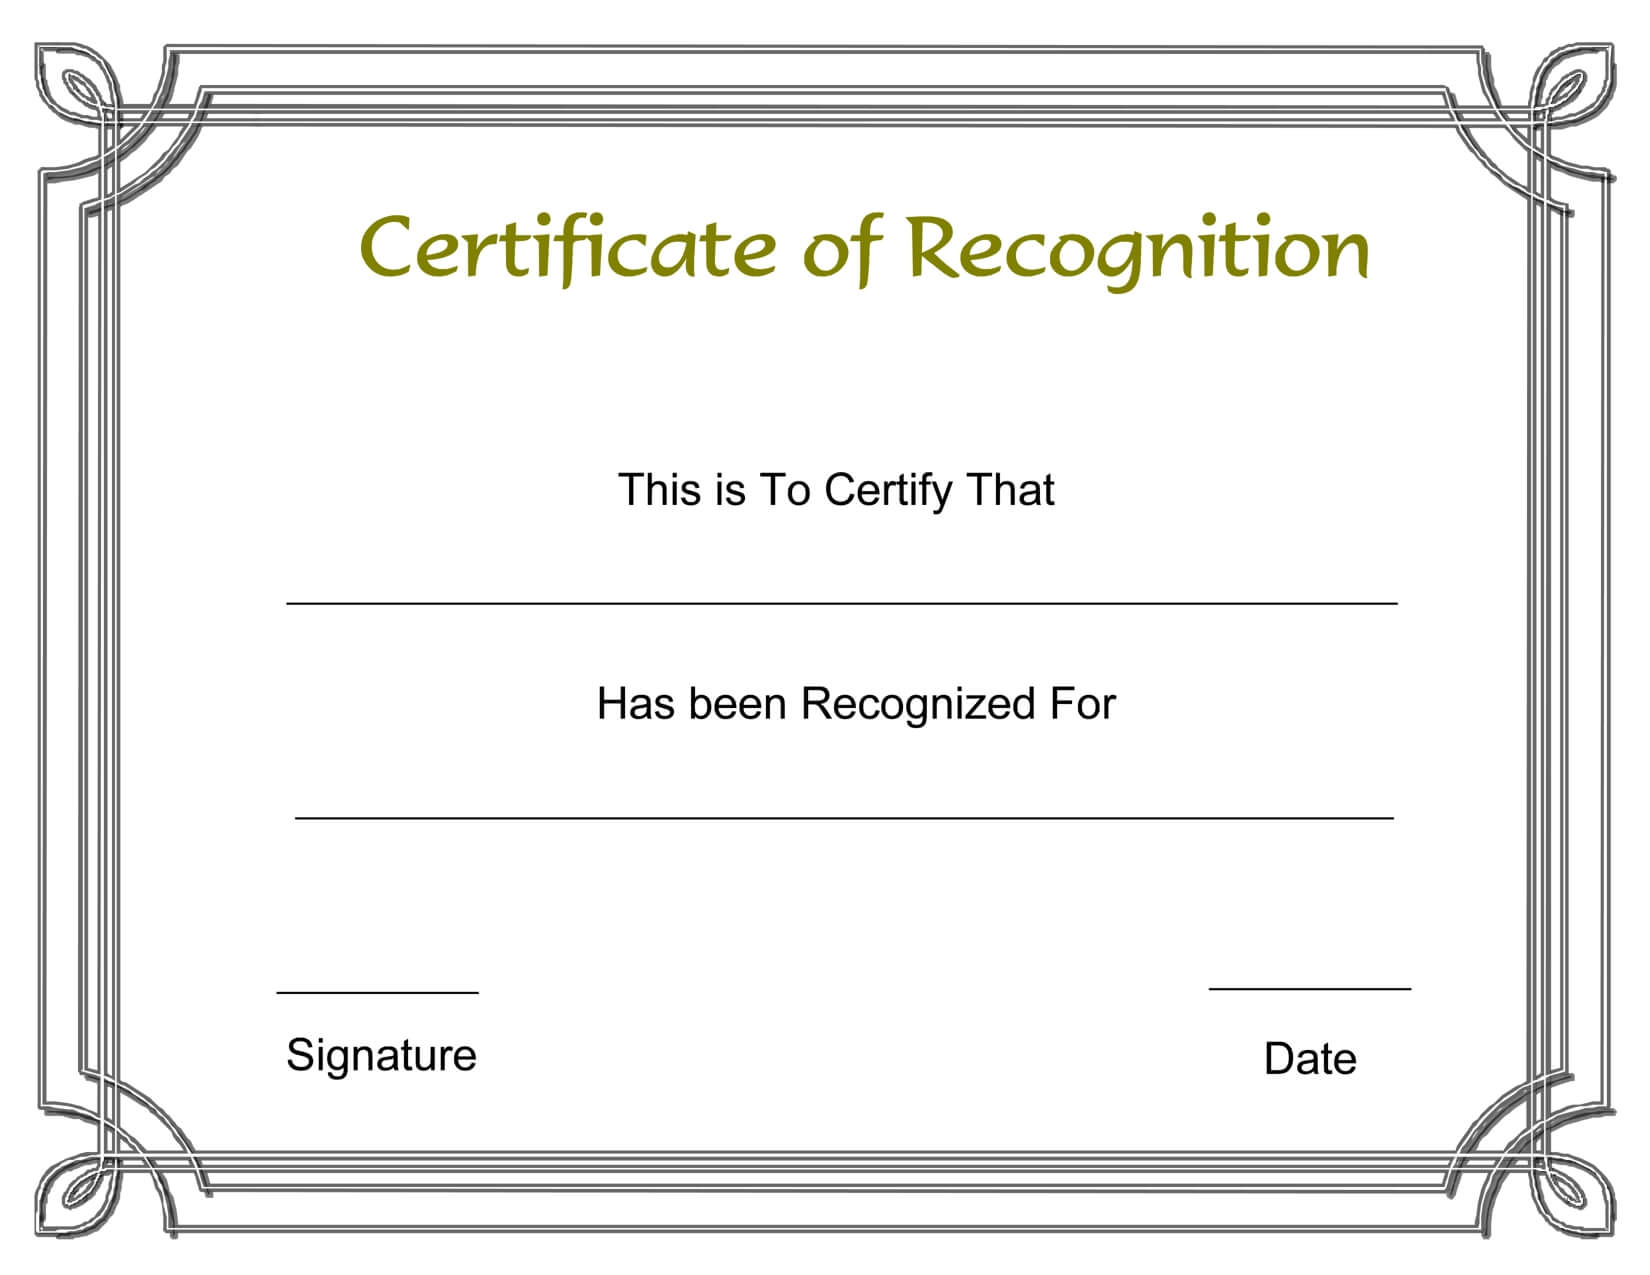 Certificate Template Recognition | Safebest.xyz Inside Template For Recognition Certificate